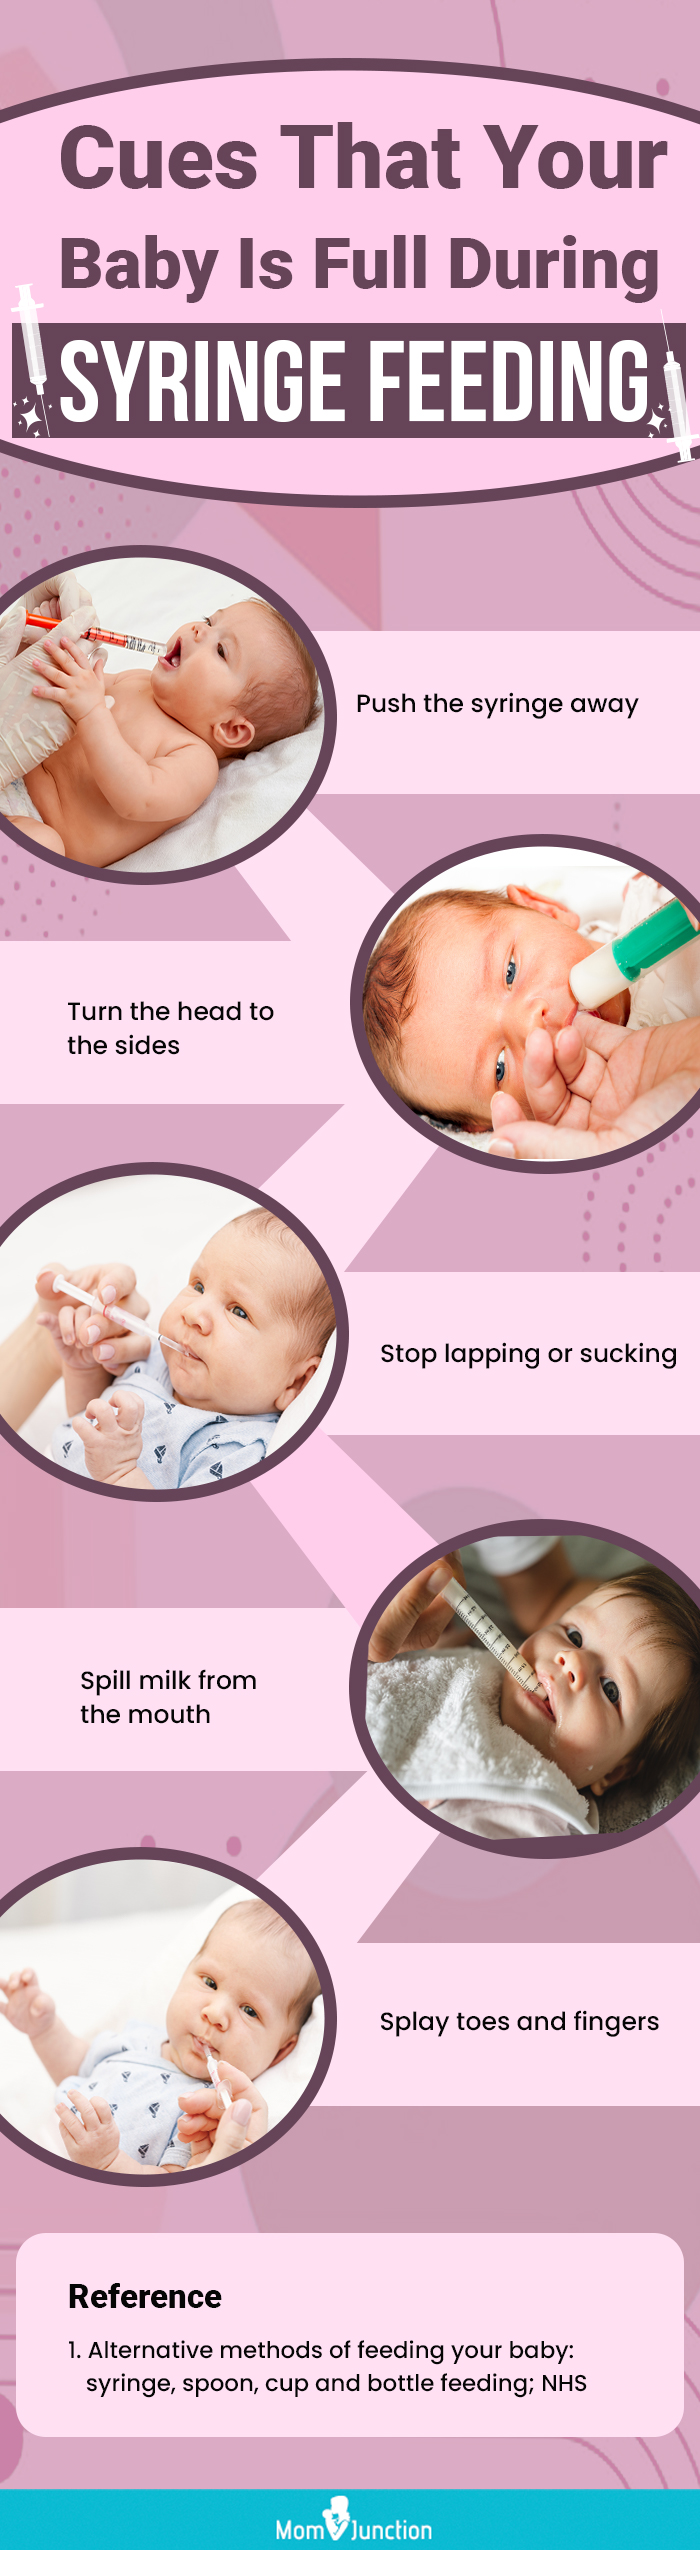 cues that your baby is full during syringe feeding (infographic)